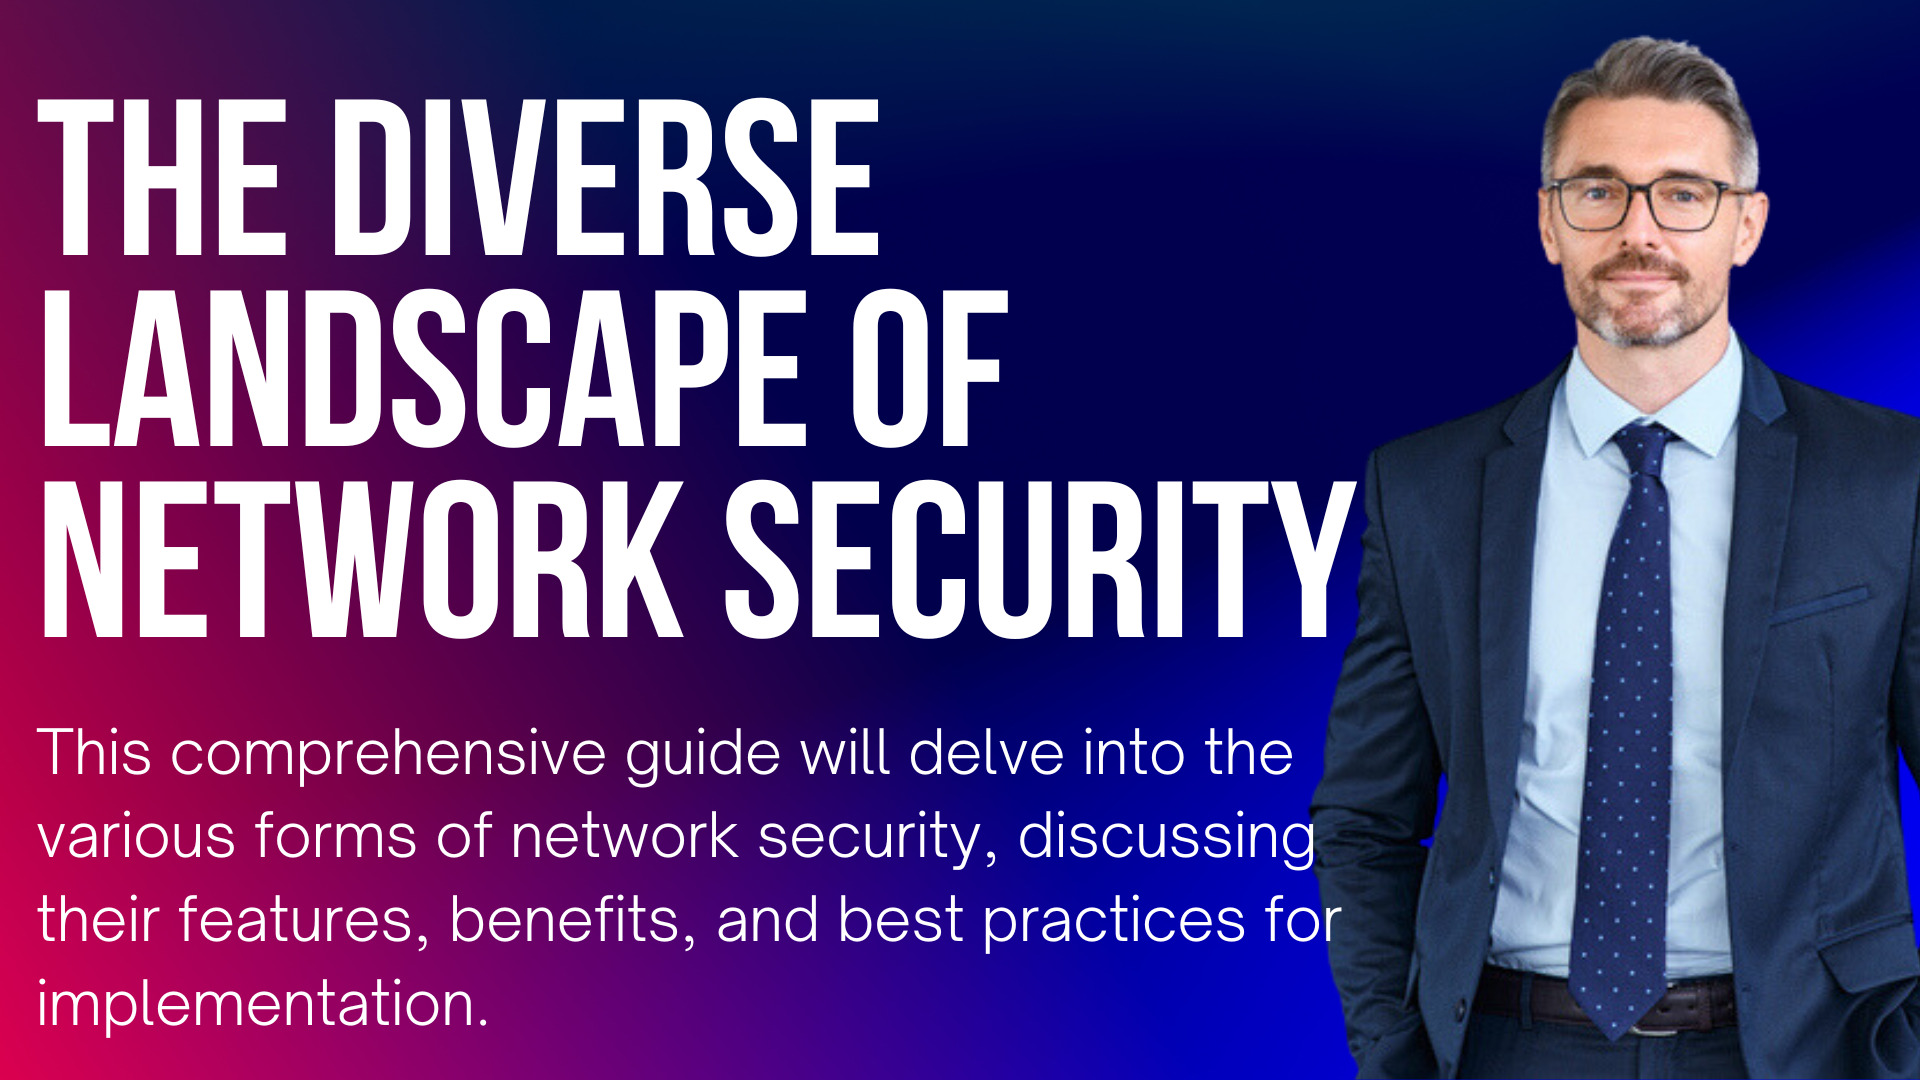 The Diverse Landscape of Network Security